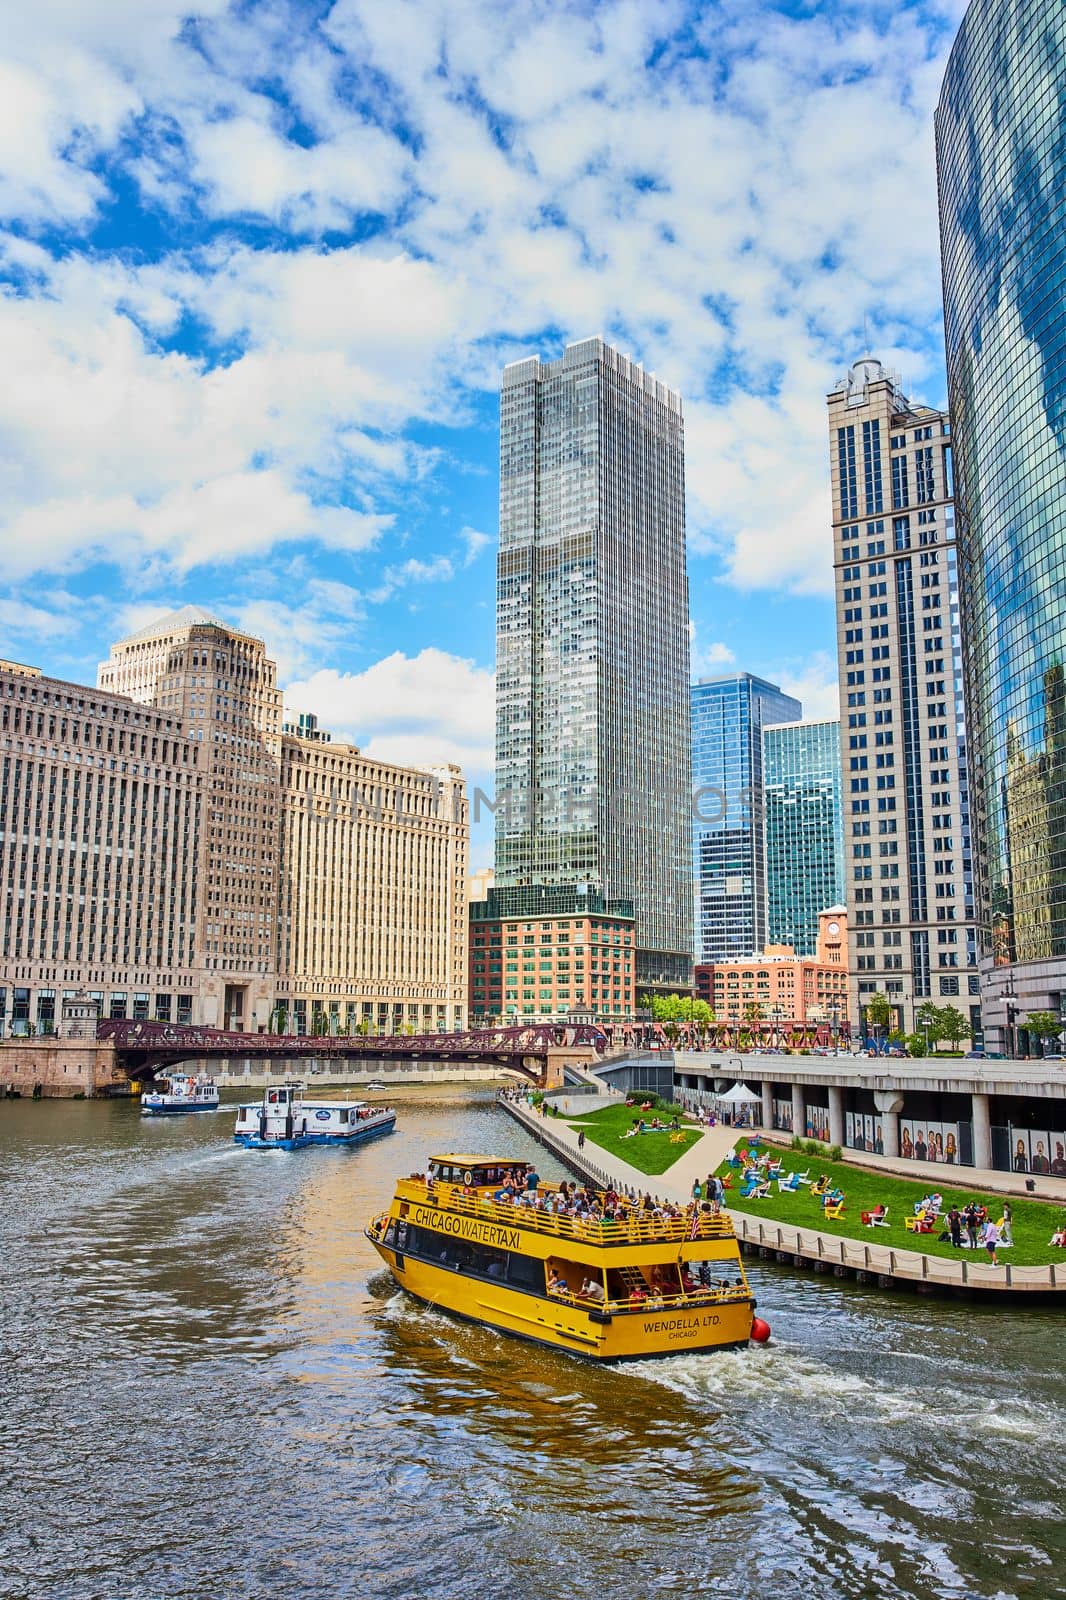 Image of Large tourist ship in Chicago canals by skyscrapers